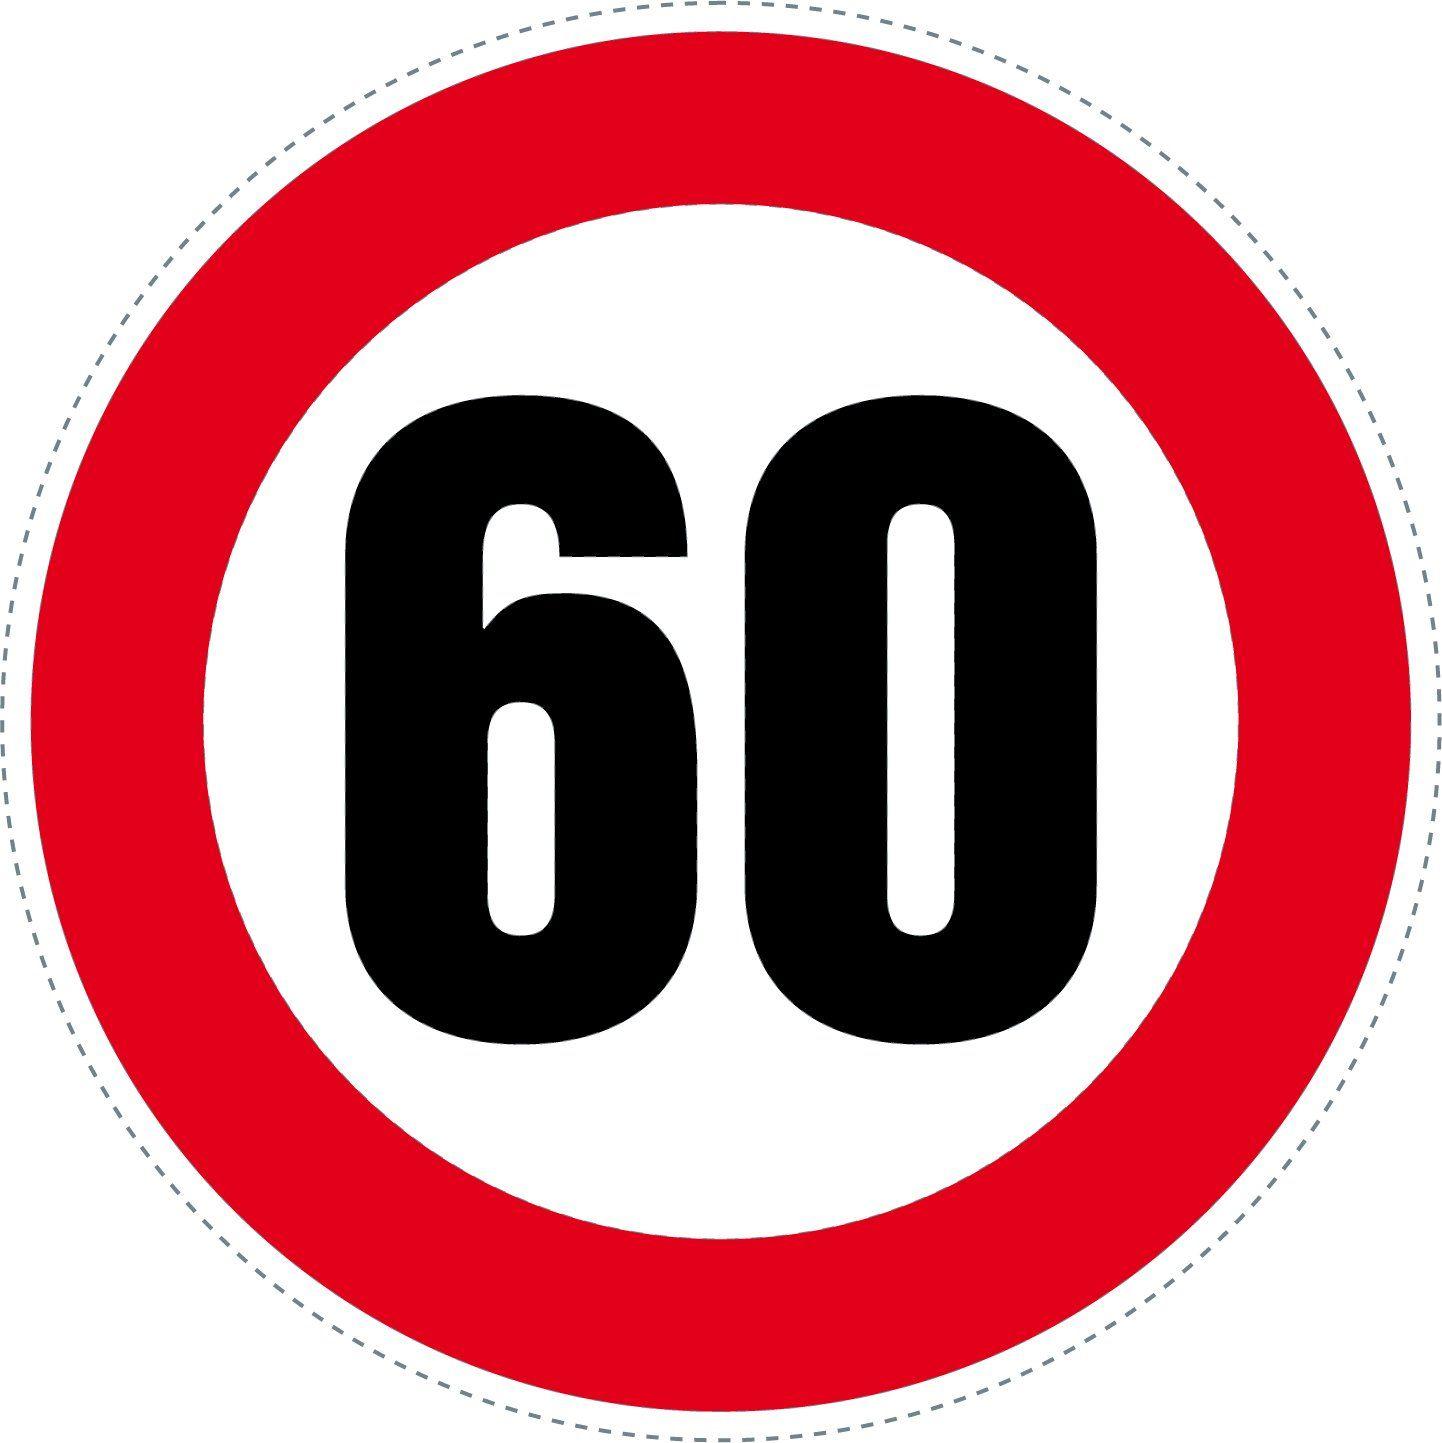 Red Circle Company Logo - SAFIRMES 2 Red Speed Limit Circle Stickers, 60 Mm Inch = 5